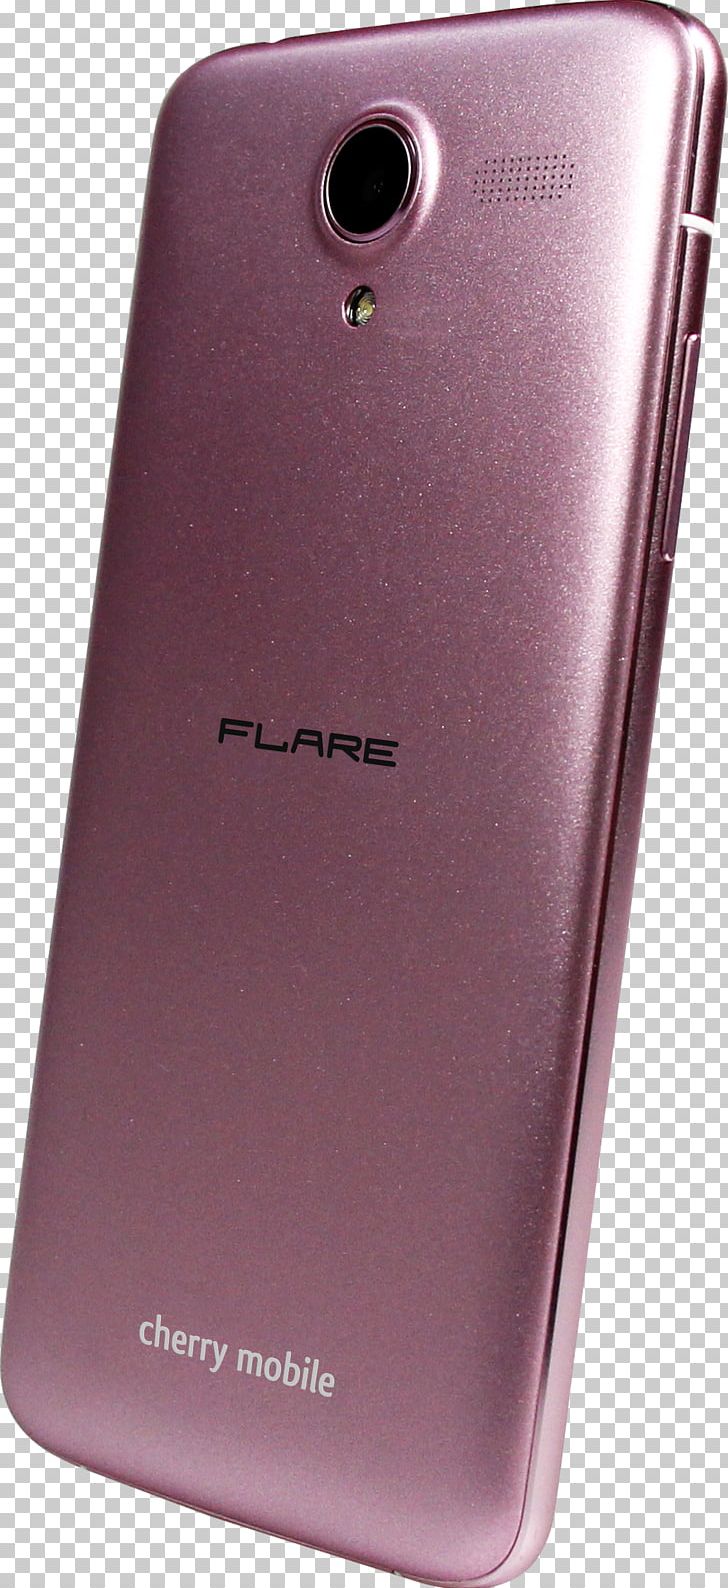 Feature Phone Smartphone PNG, Clipart, Cherry Mobile Flare, Communication Device, Electronic Device, Electronics, Feature Phone Free PNG Download